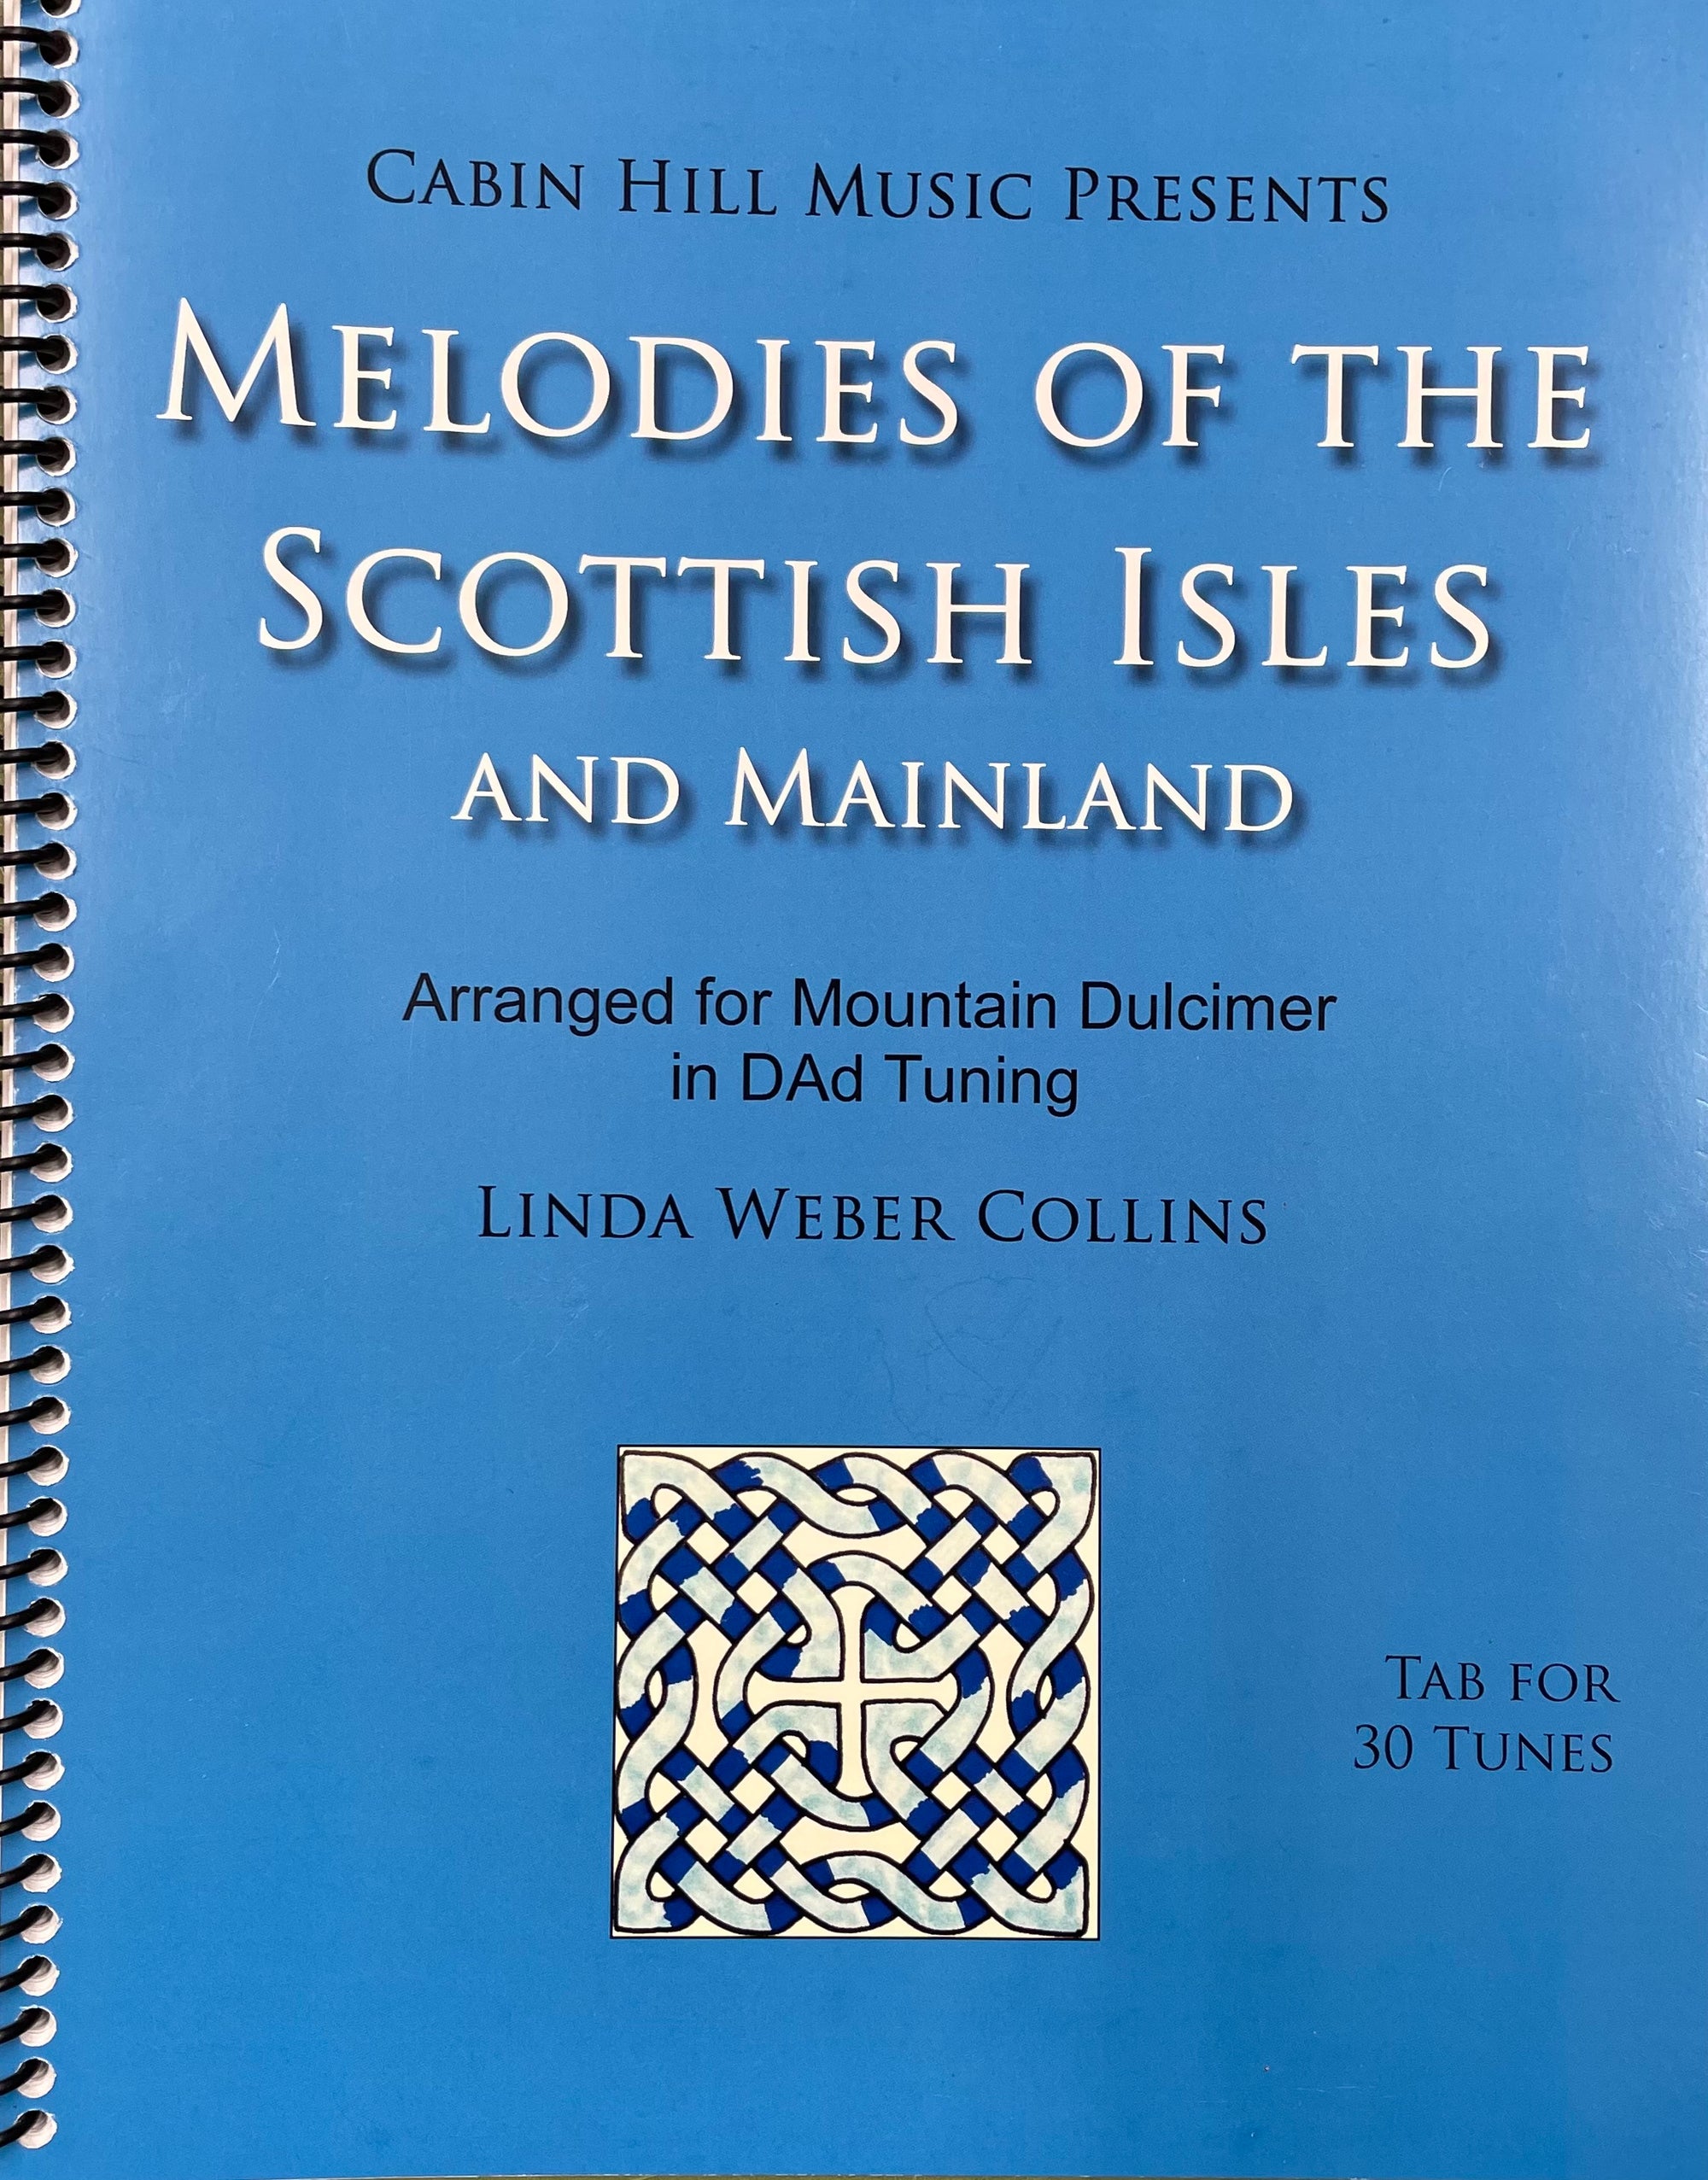 Cover of a Melodies of the Scottish Isles and Mainland by Linda Weber Collins, arranged for mountain dulcimer in DAD tuning, featuring a Celtic knot design.